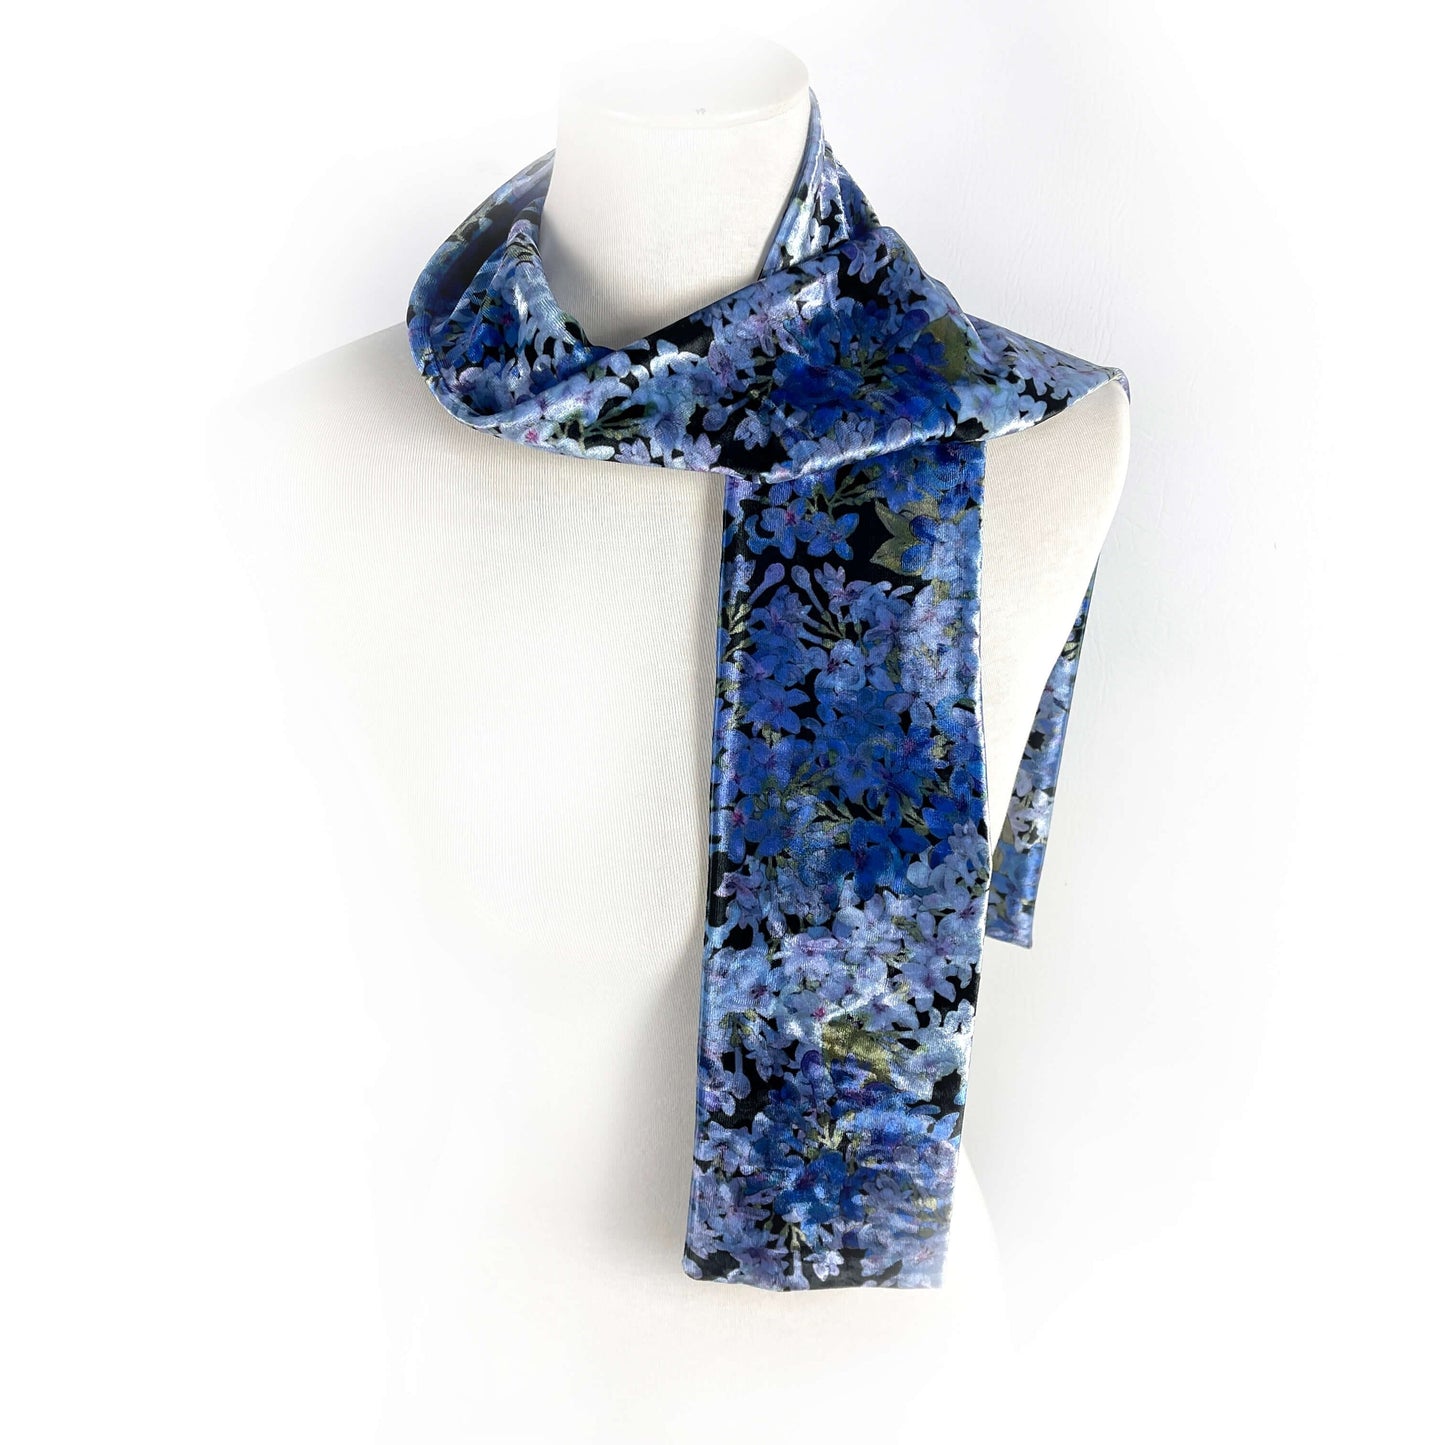 Lapis Blue Lilac Velour Scarf, Womans Scarf, handmade scarf, designer scarf, floral scarf, Wear all day or evening